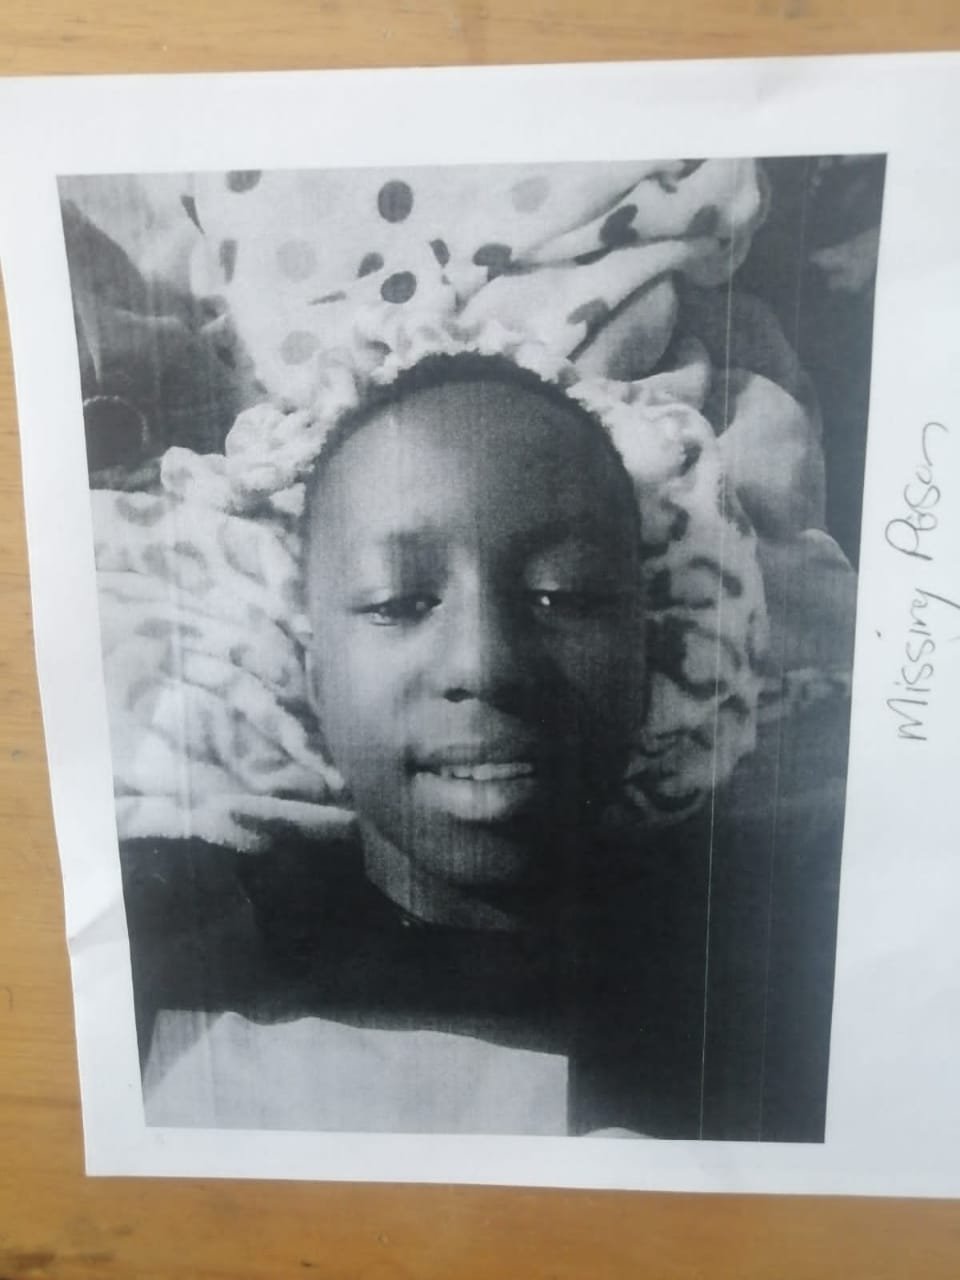 Mlungisi police in the Eastern Cape appeal to members of the community to assist in locating a missing 14-year-old